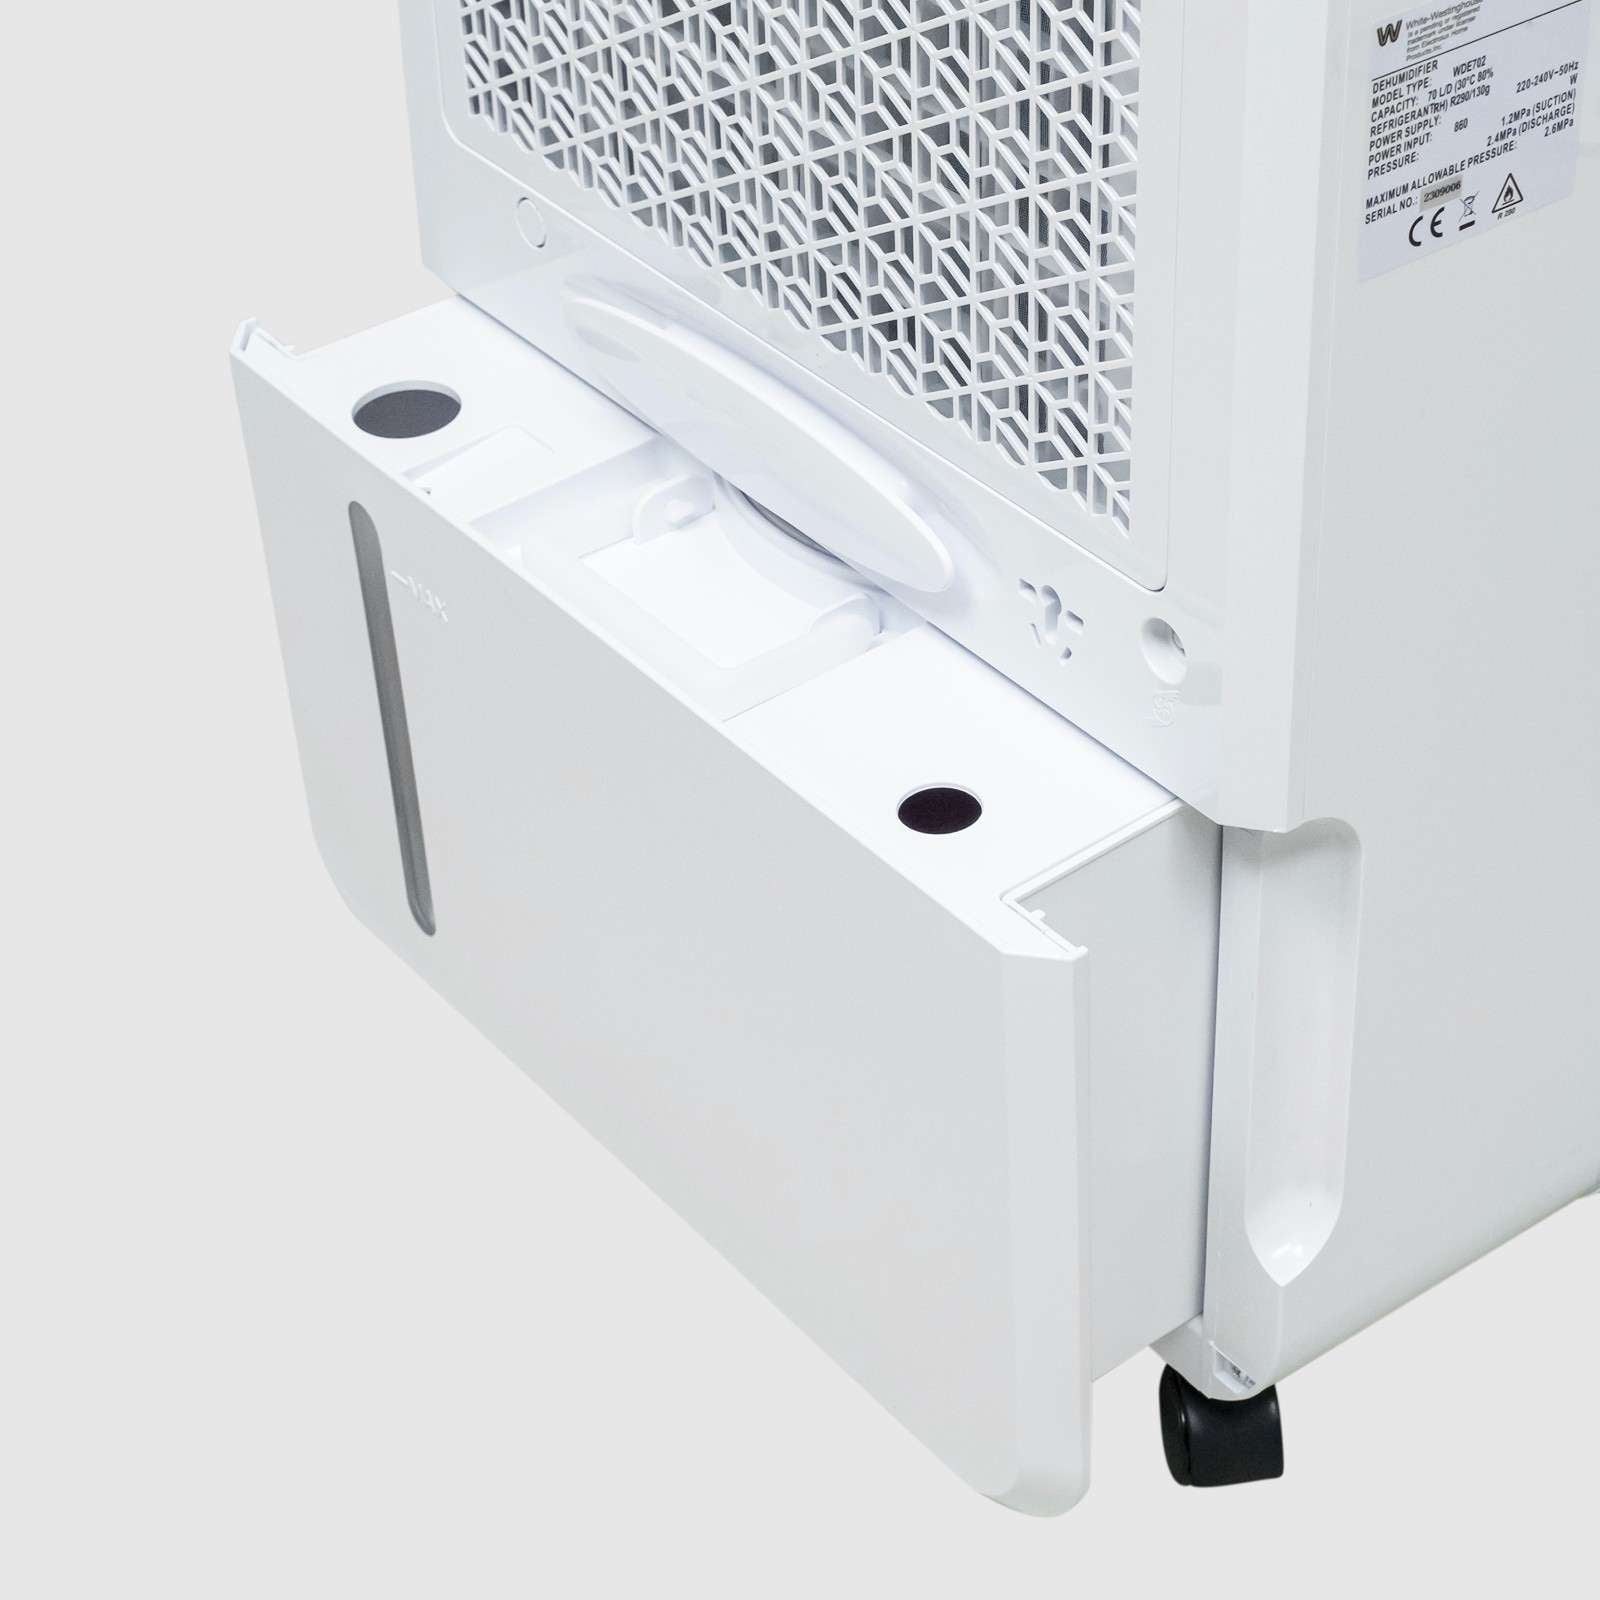 Close-up view of the White Westinghouse Dehumidifier WDE702 with the water tank partially removed, showcasing the easy-access water tank compartment and back air vent. The sleek white design is suitable for maintaining optimal humidity levels in residential and commercial spaces.